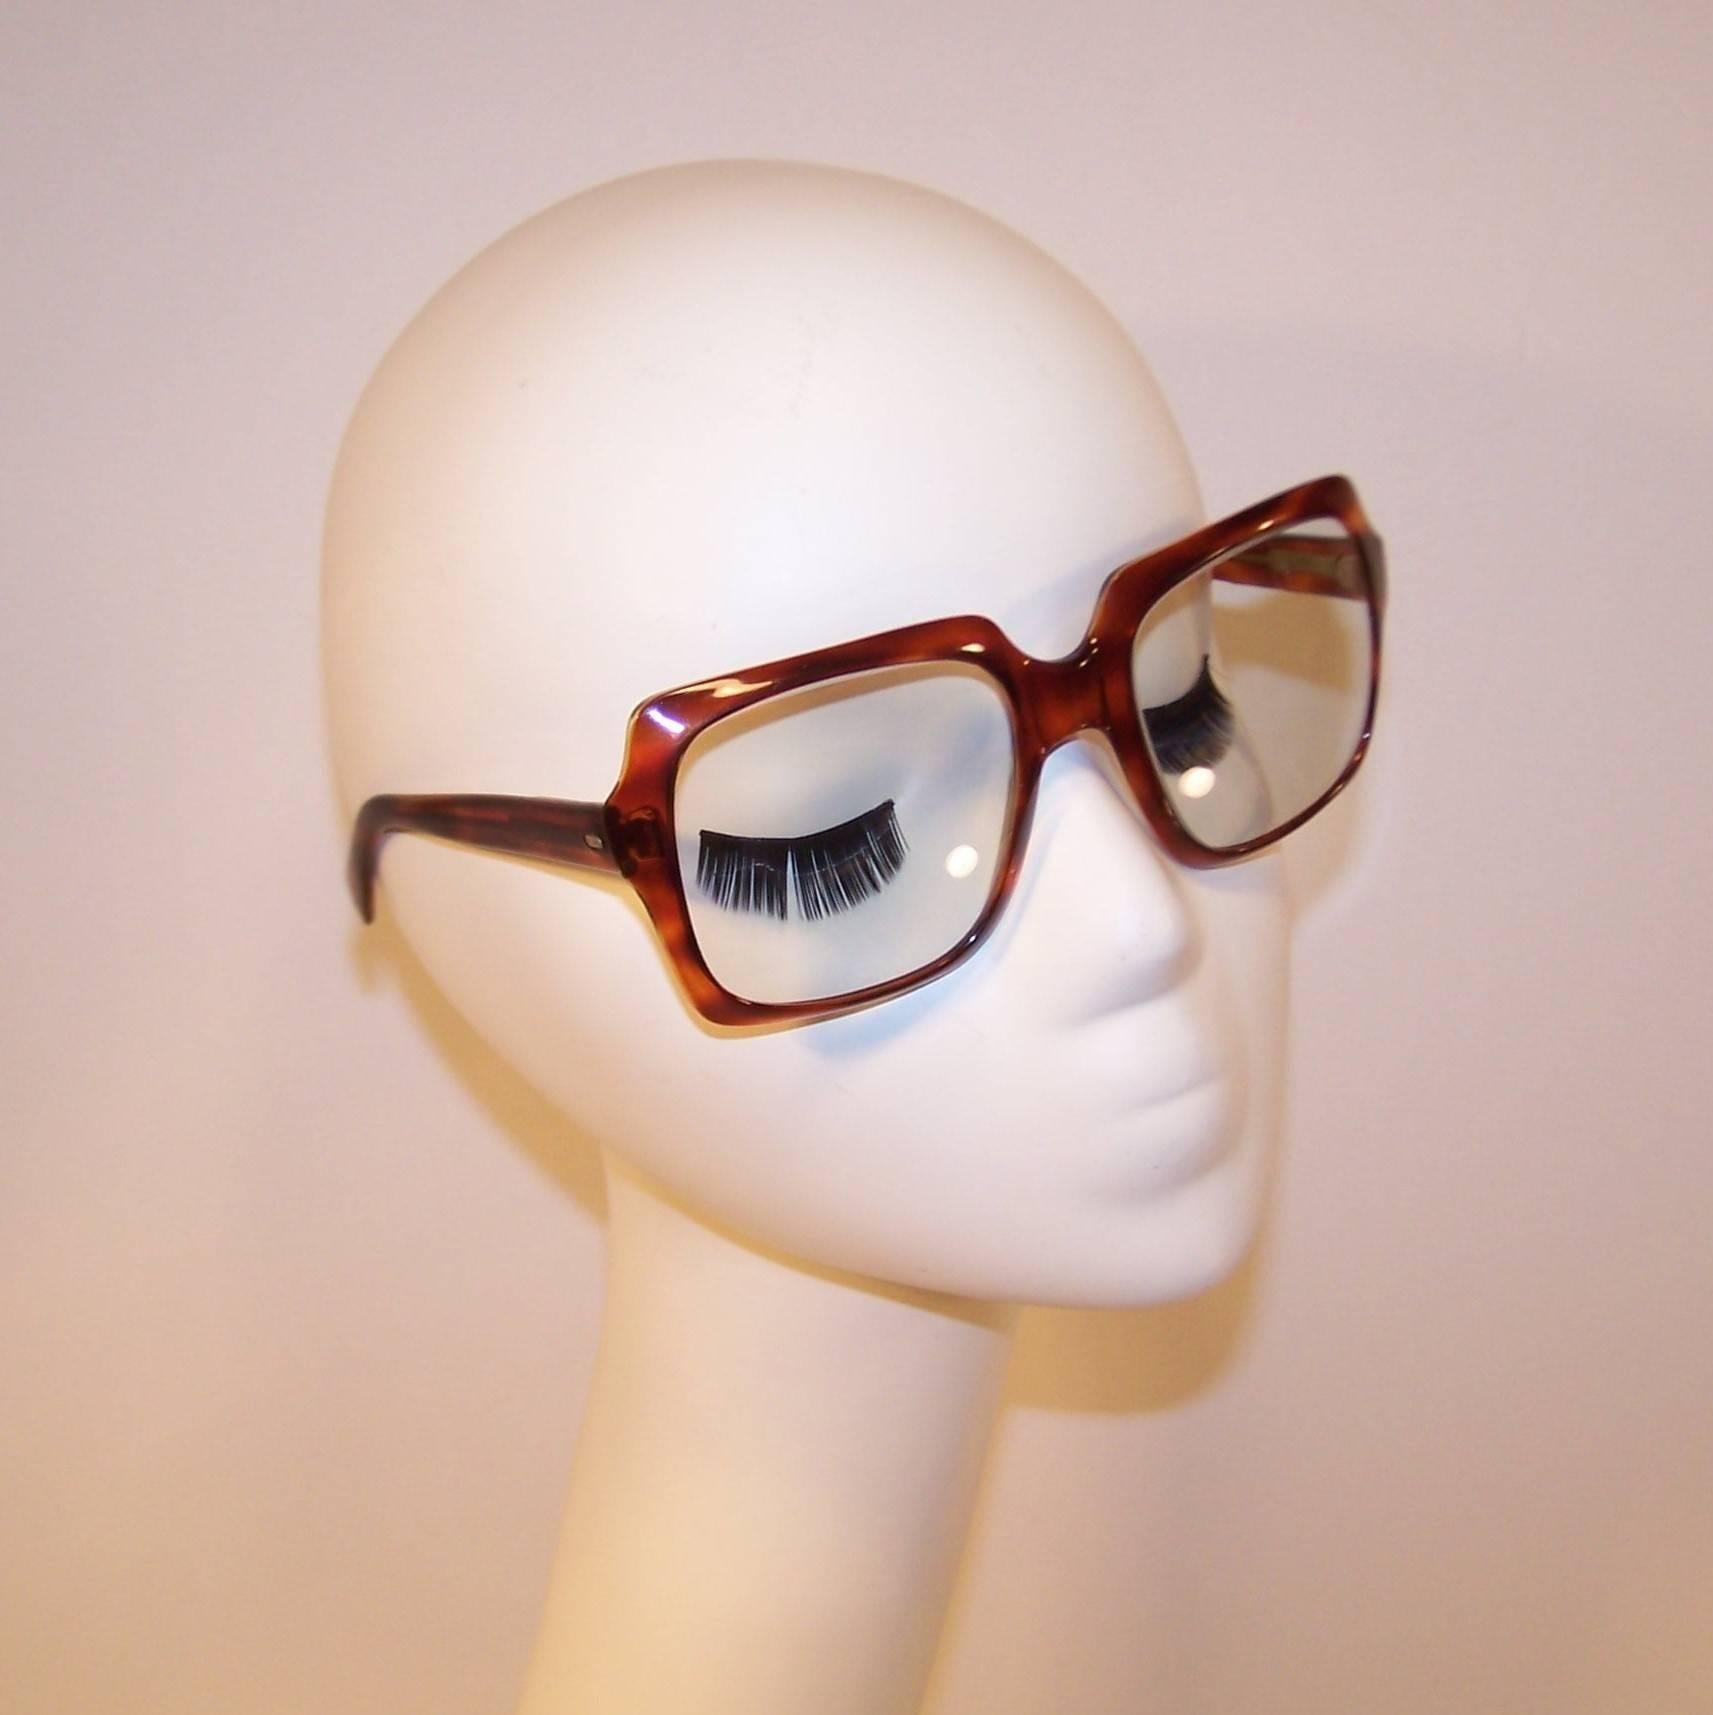 These 1970's Italian eyeglass frames make a statement ... 'I'm large and I'm in charge'.  They also speak volumes about high fashion with a wink and a nod to a fun over-the-top look that is sure to get you noticed.  The faux tortoise body is a